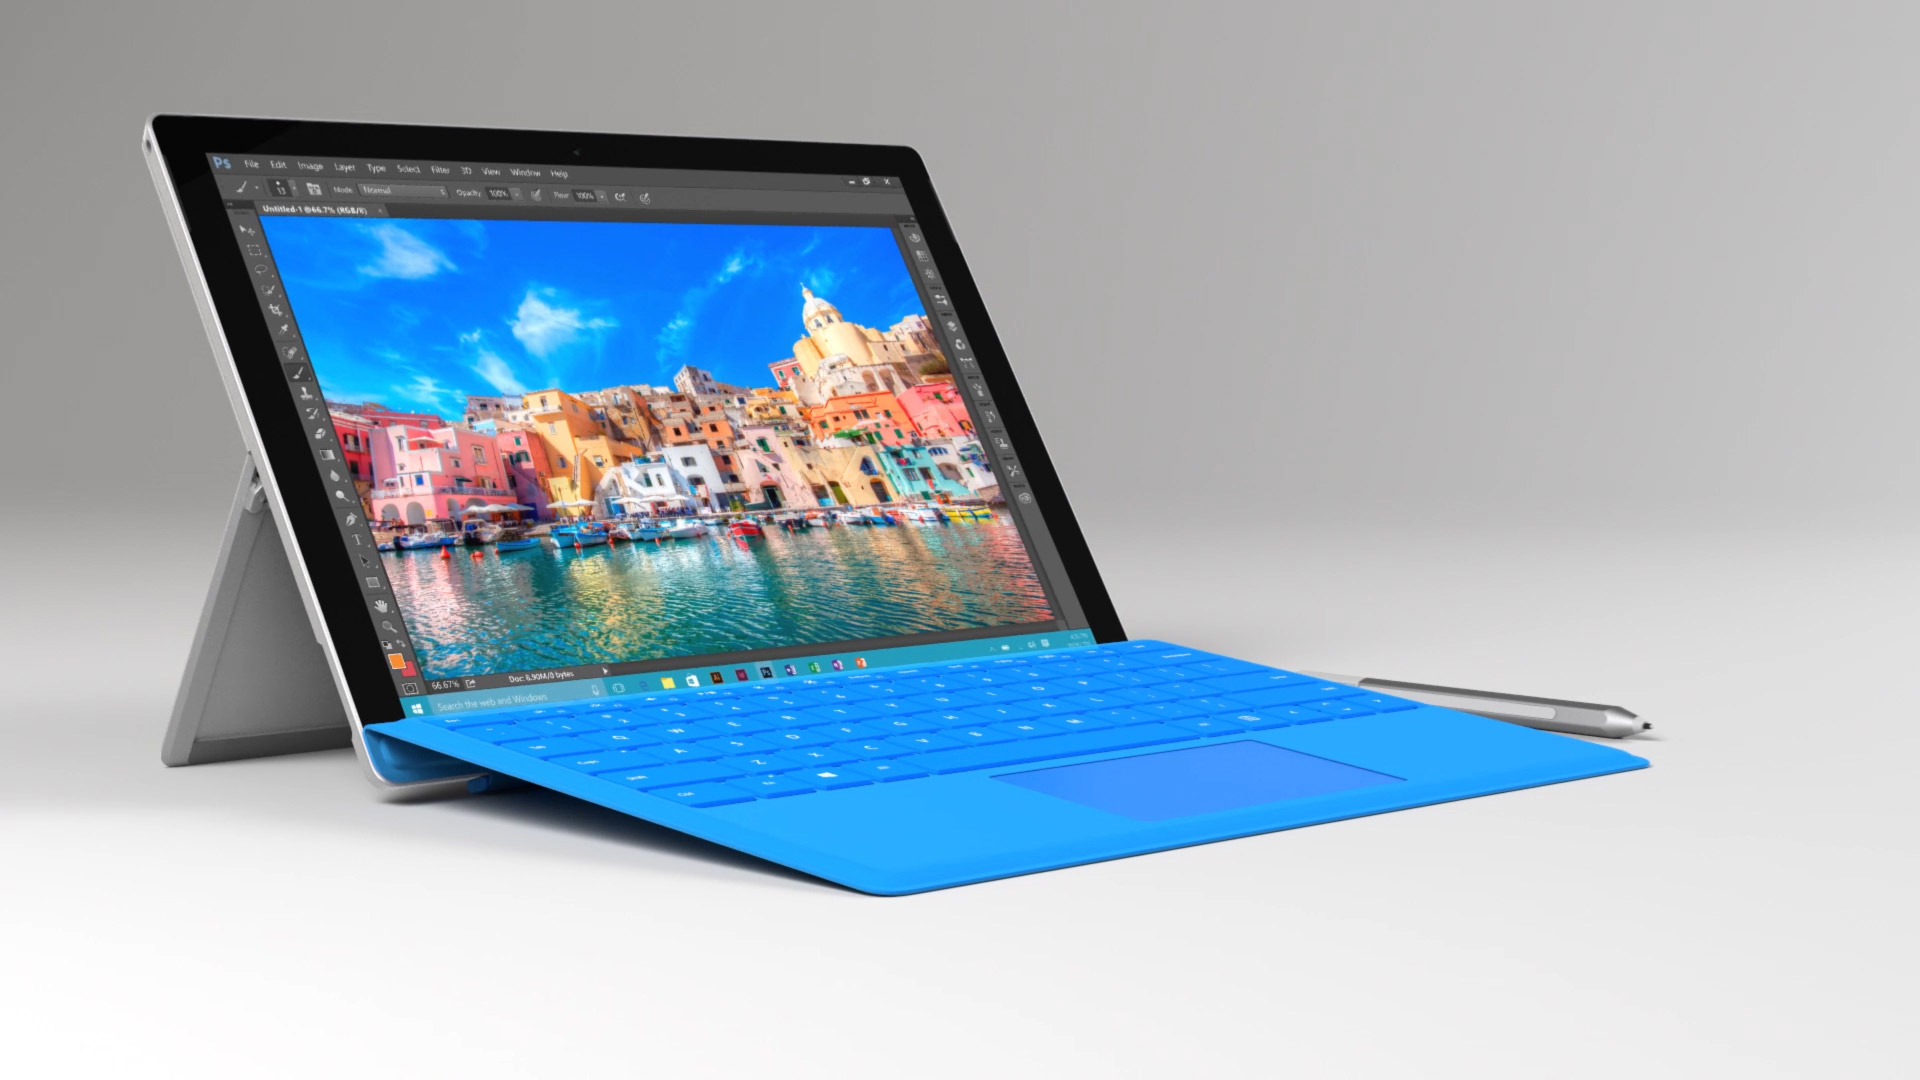 1920x1080 MICROSOFT SURFACE PRO 4 Photos, Images and Wallpapers